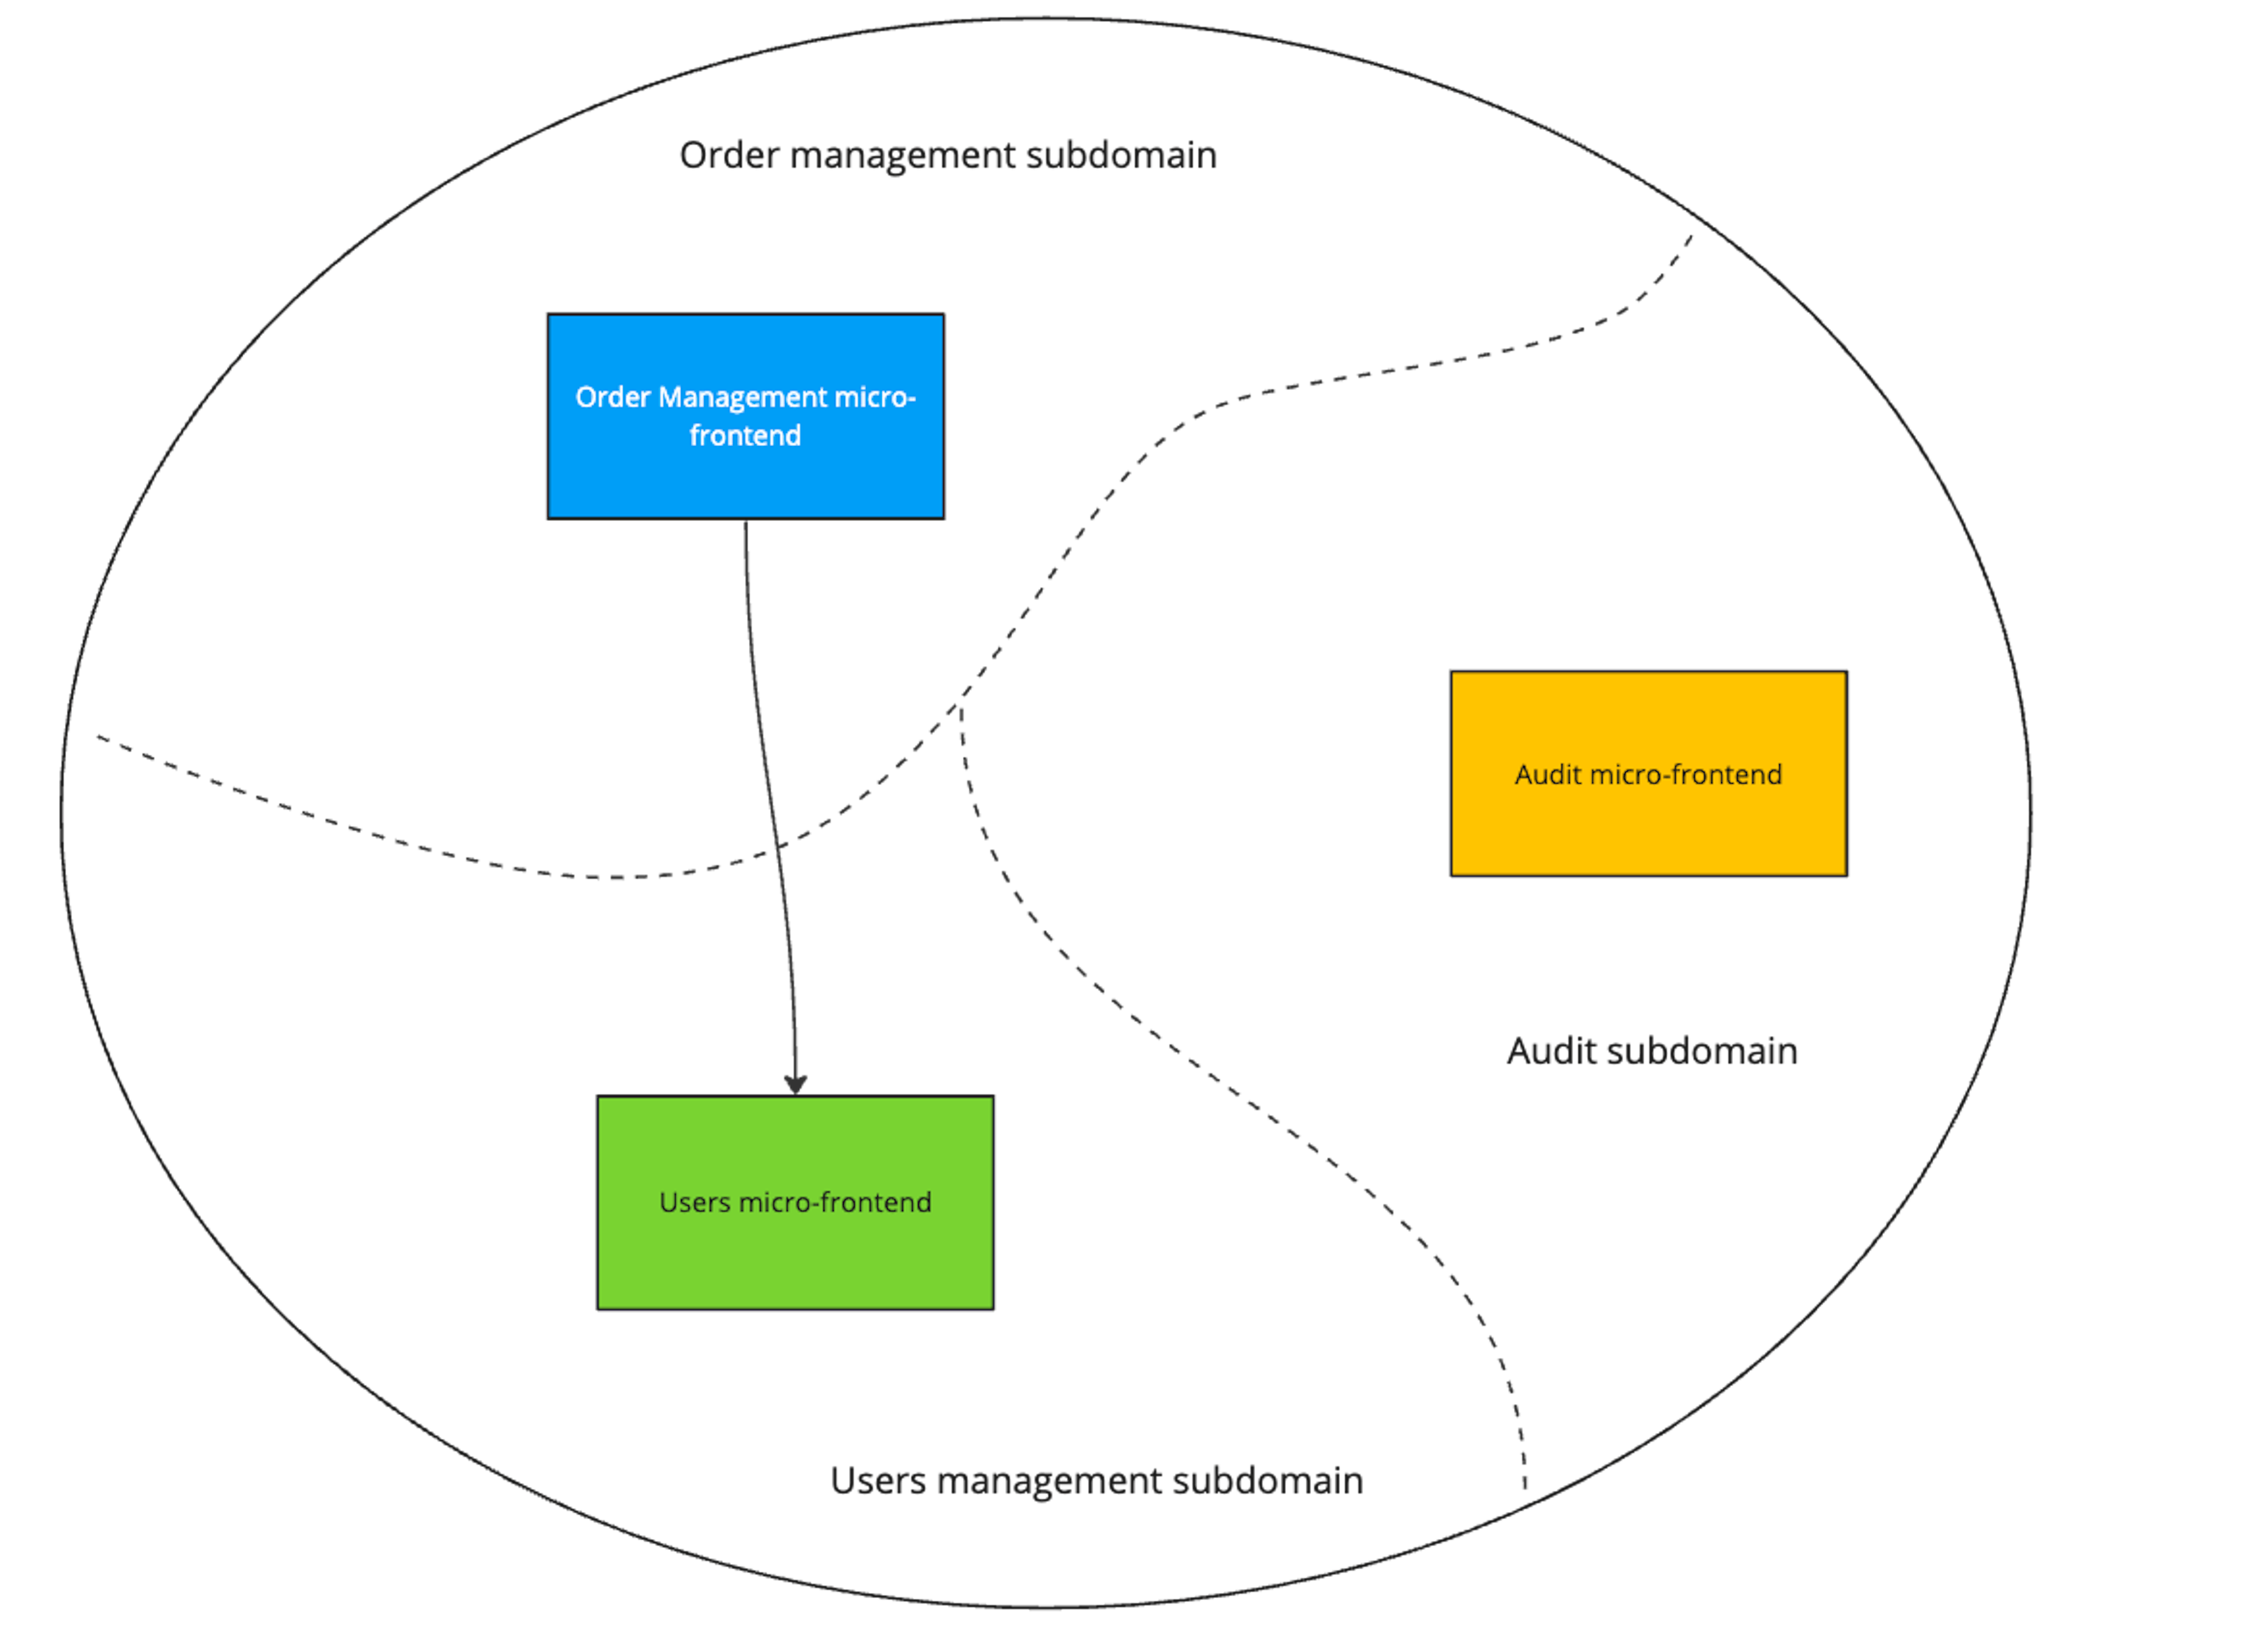 Subdomains and bounded context